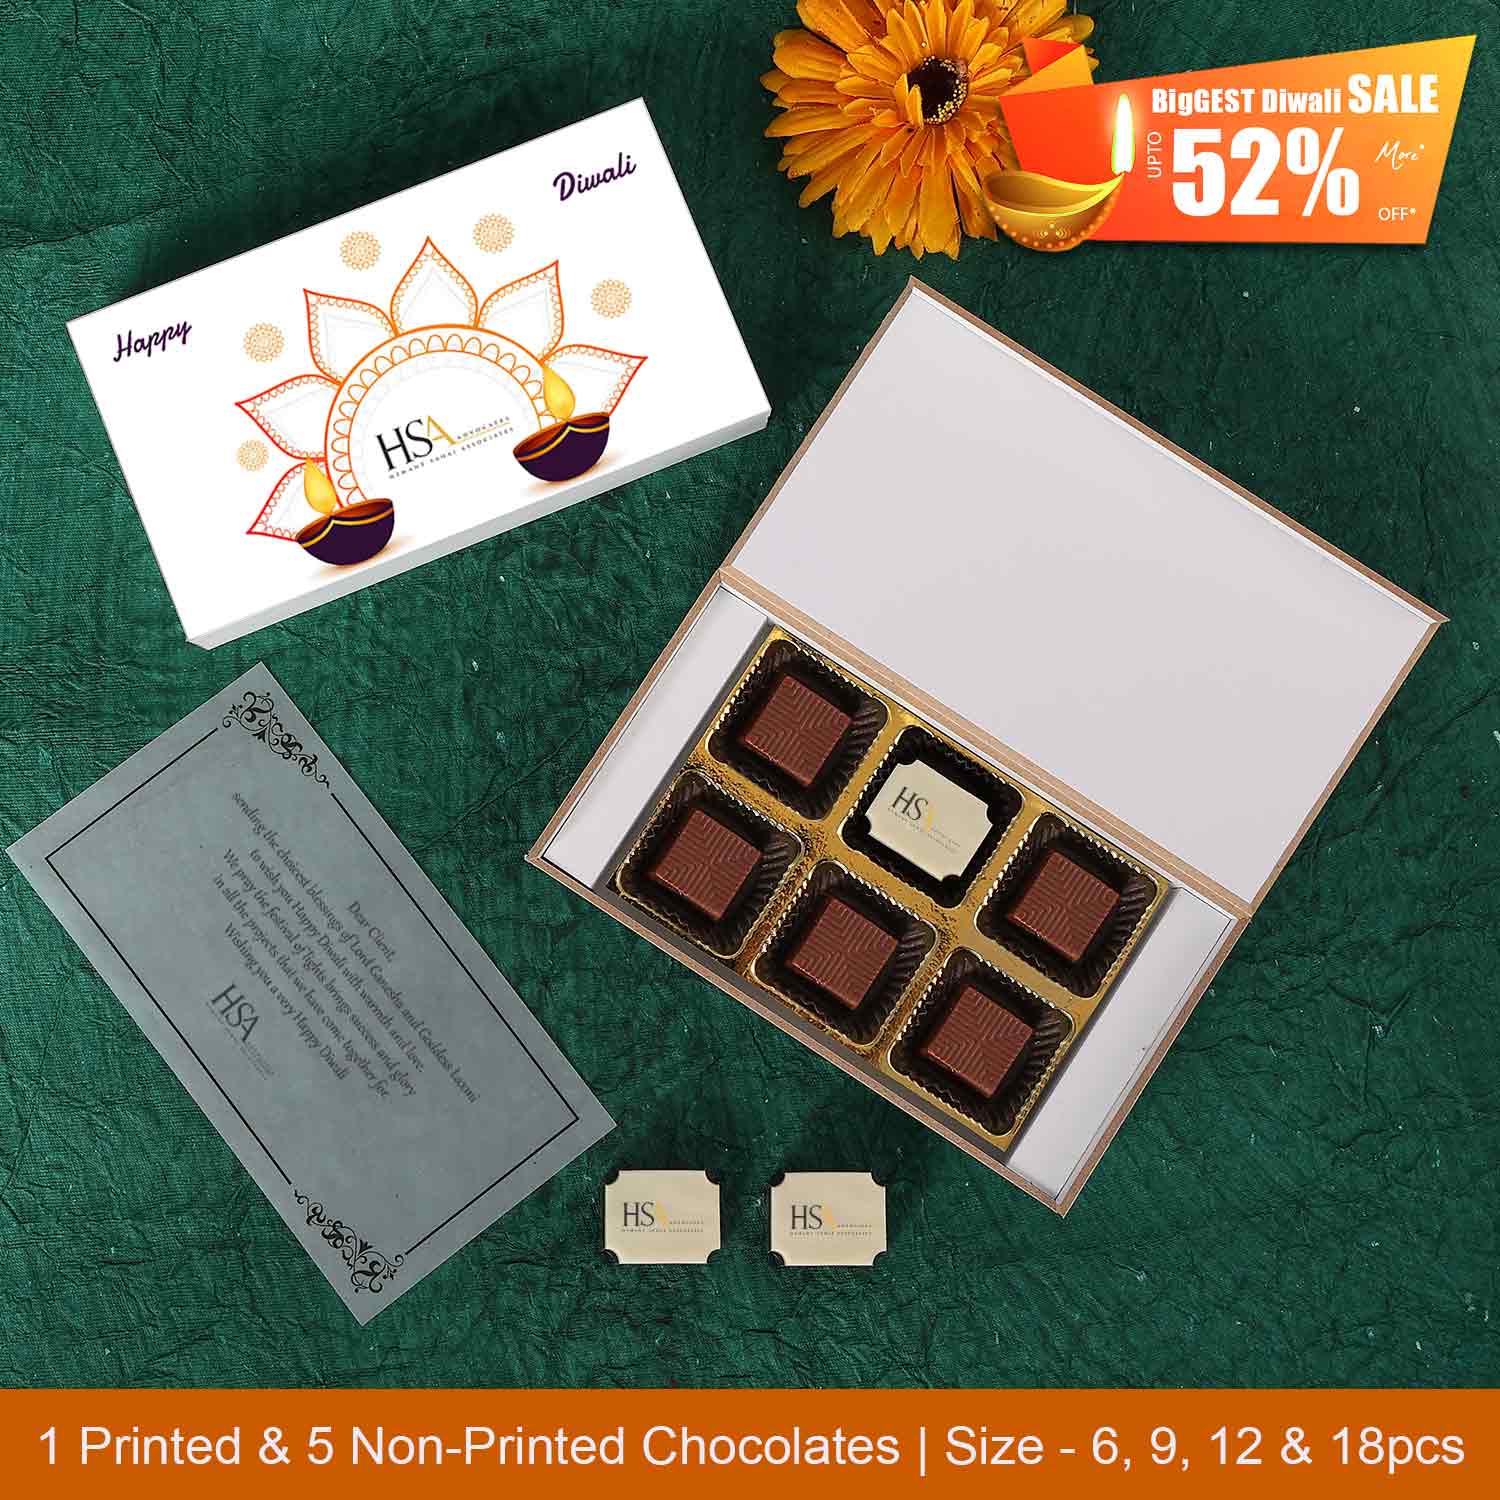 best site to buy chocolates online in india, corporate chocolate gift boxes, buy premium chocolates online india, custom chocolate corporate gifts